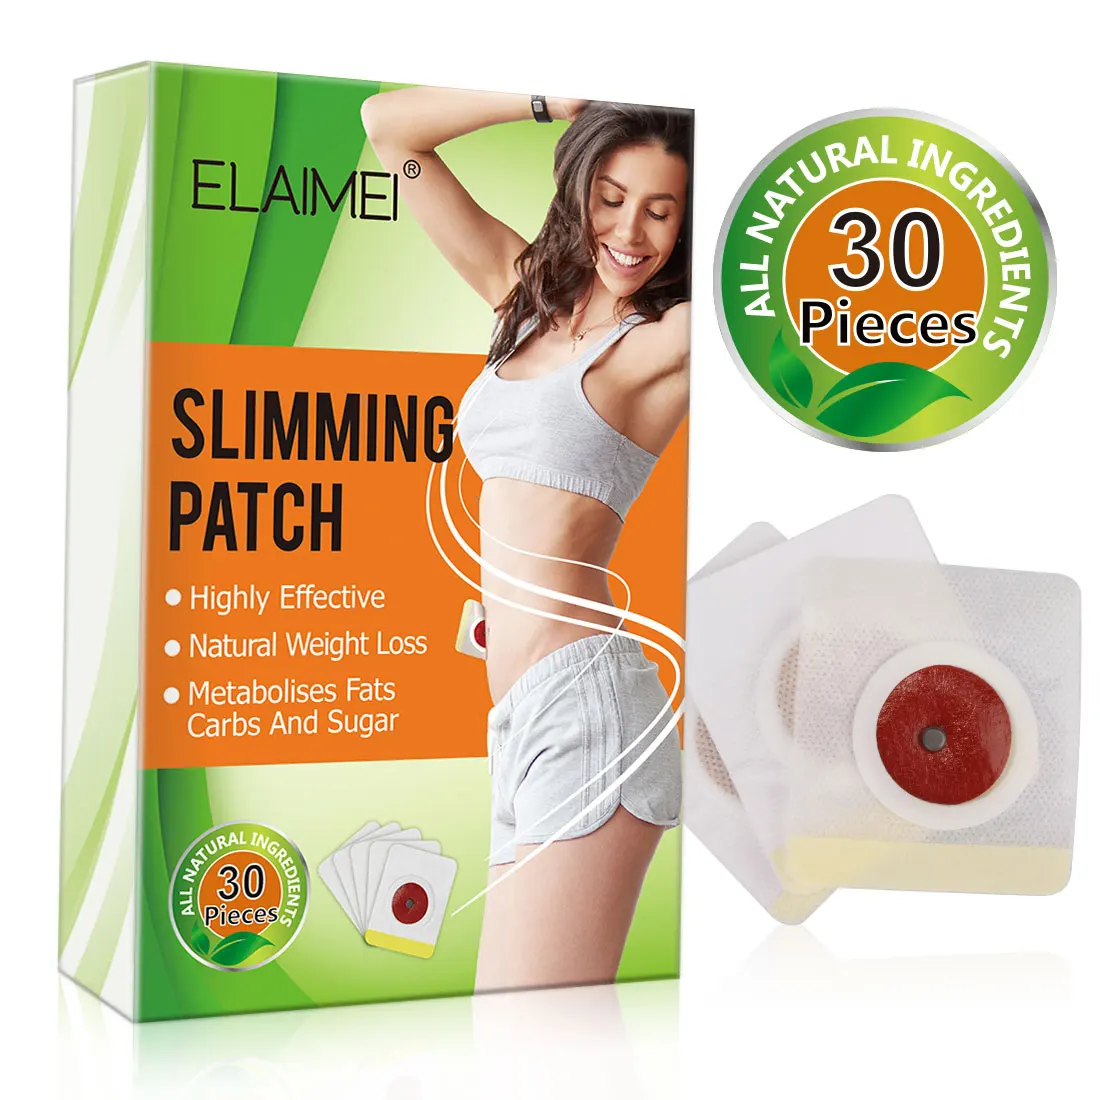 

ELAIMEI Private Label High Effective Natural Herbal Slimming Patch Belly Weight Loss Fat Burning Slim Patches